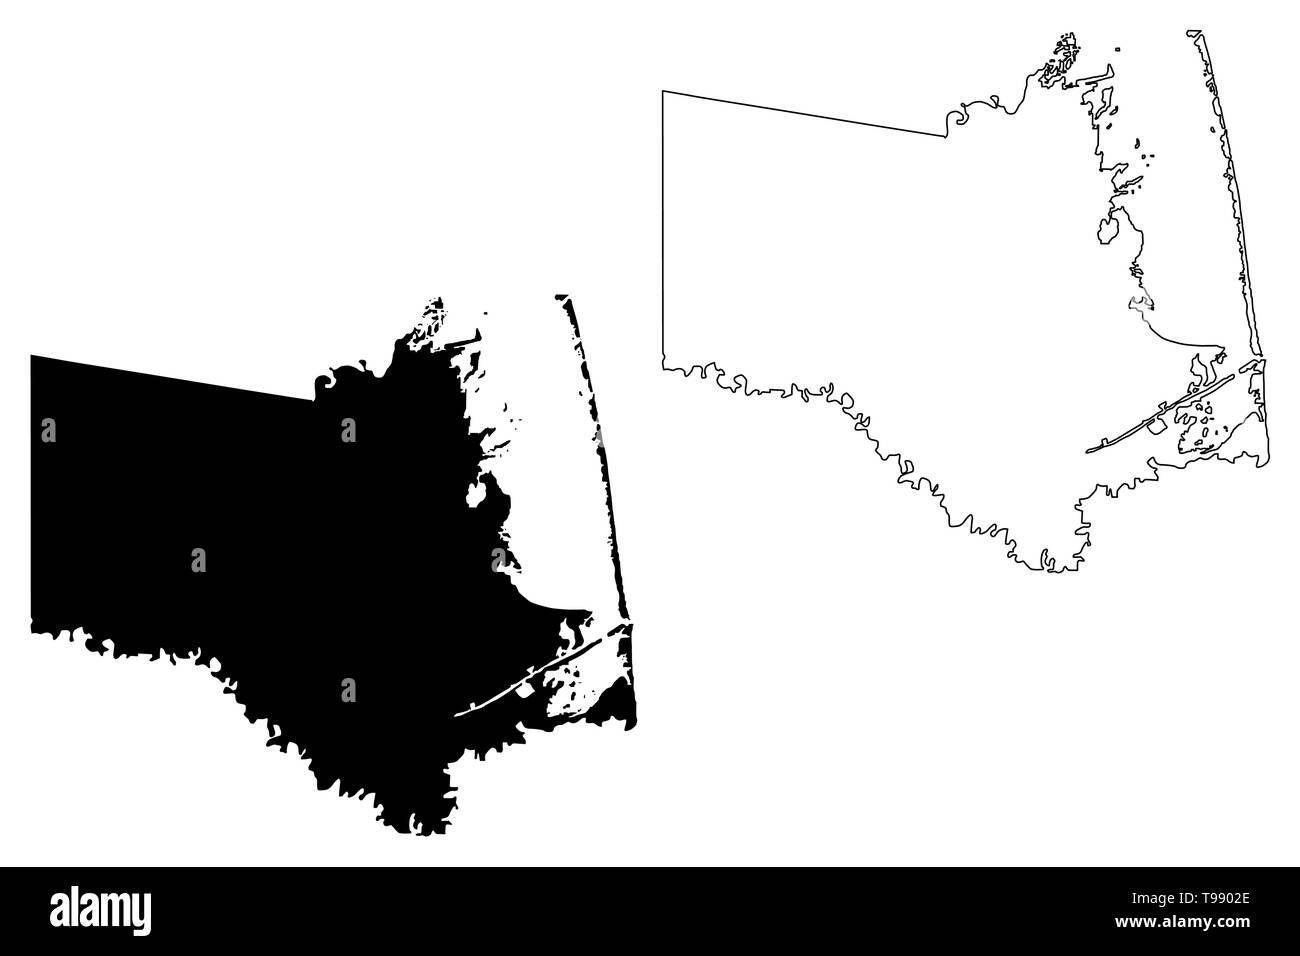 Cameron County, Texas (Counties in Texas, United States of America,USA, U.S., US) map vector illustration, scribble sketch Cameron map Stock Vector